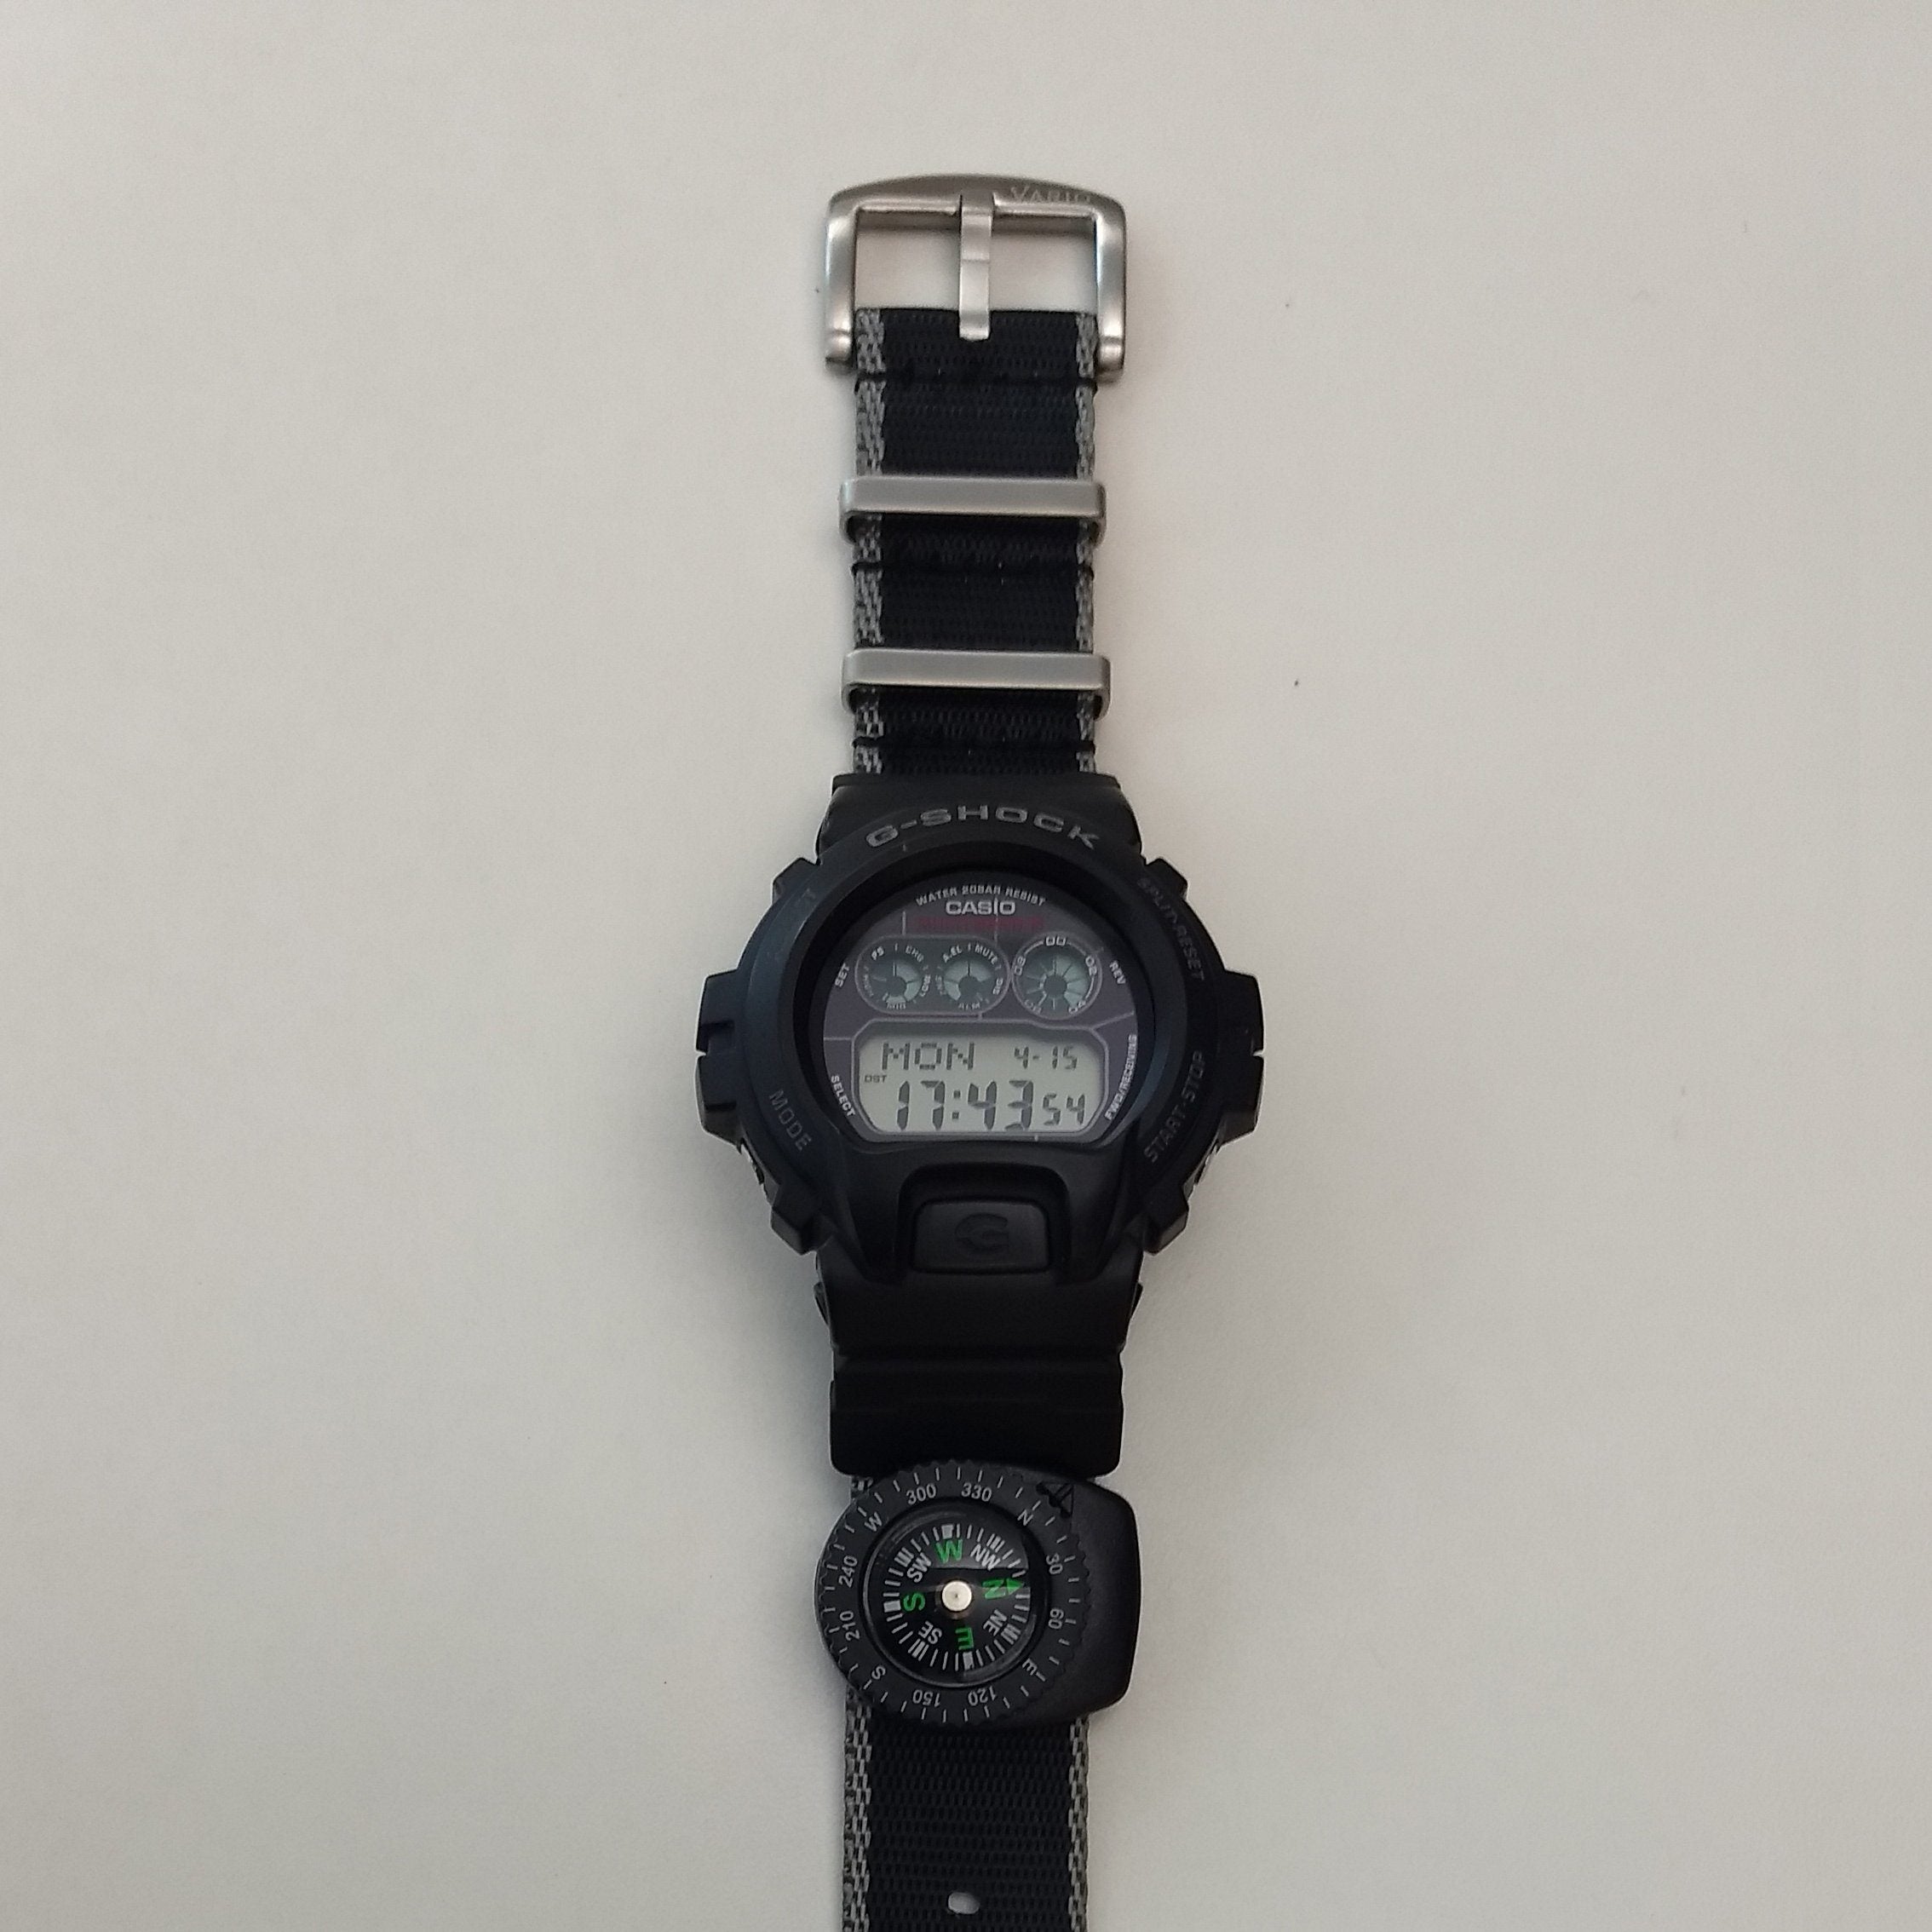 What do you think of this Seat Belt on this G-Shock? Photo by #varioeveryday member Carlos.